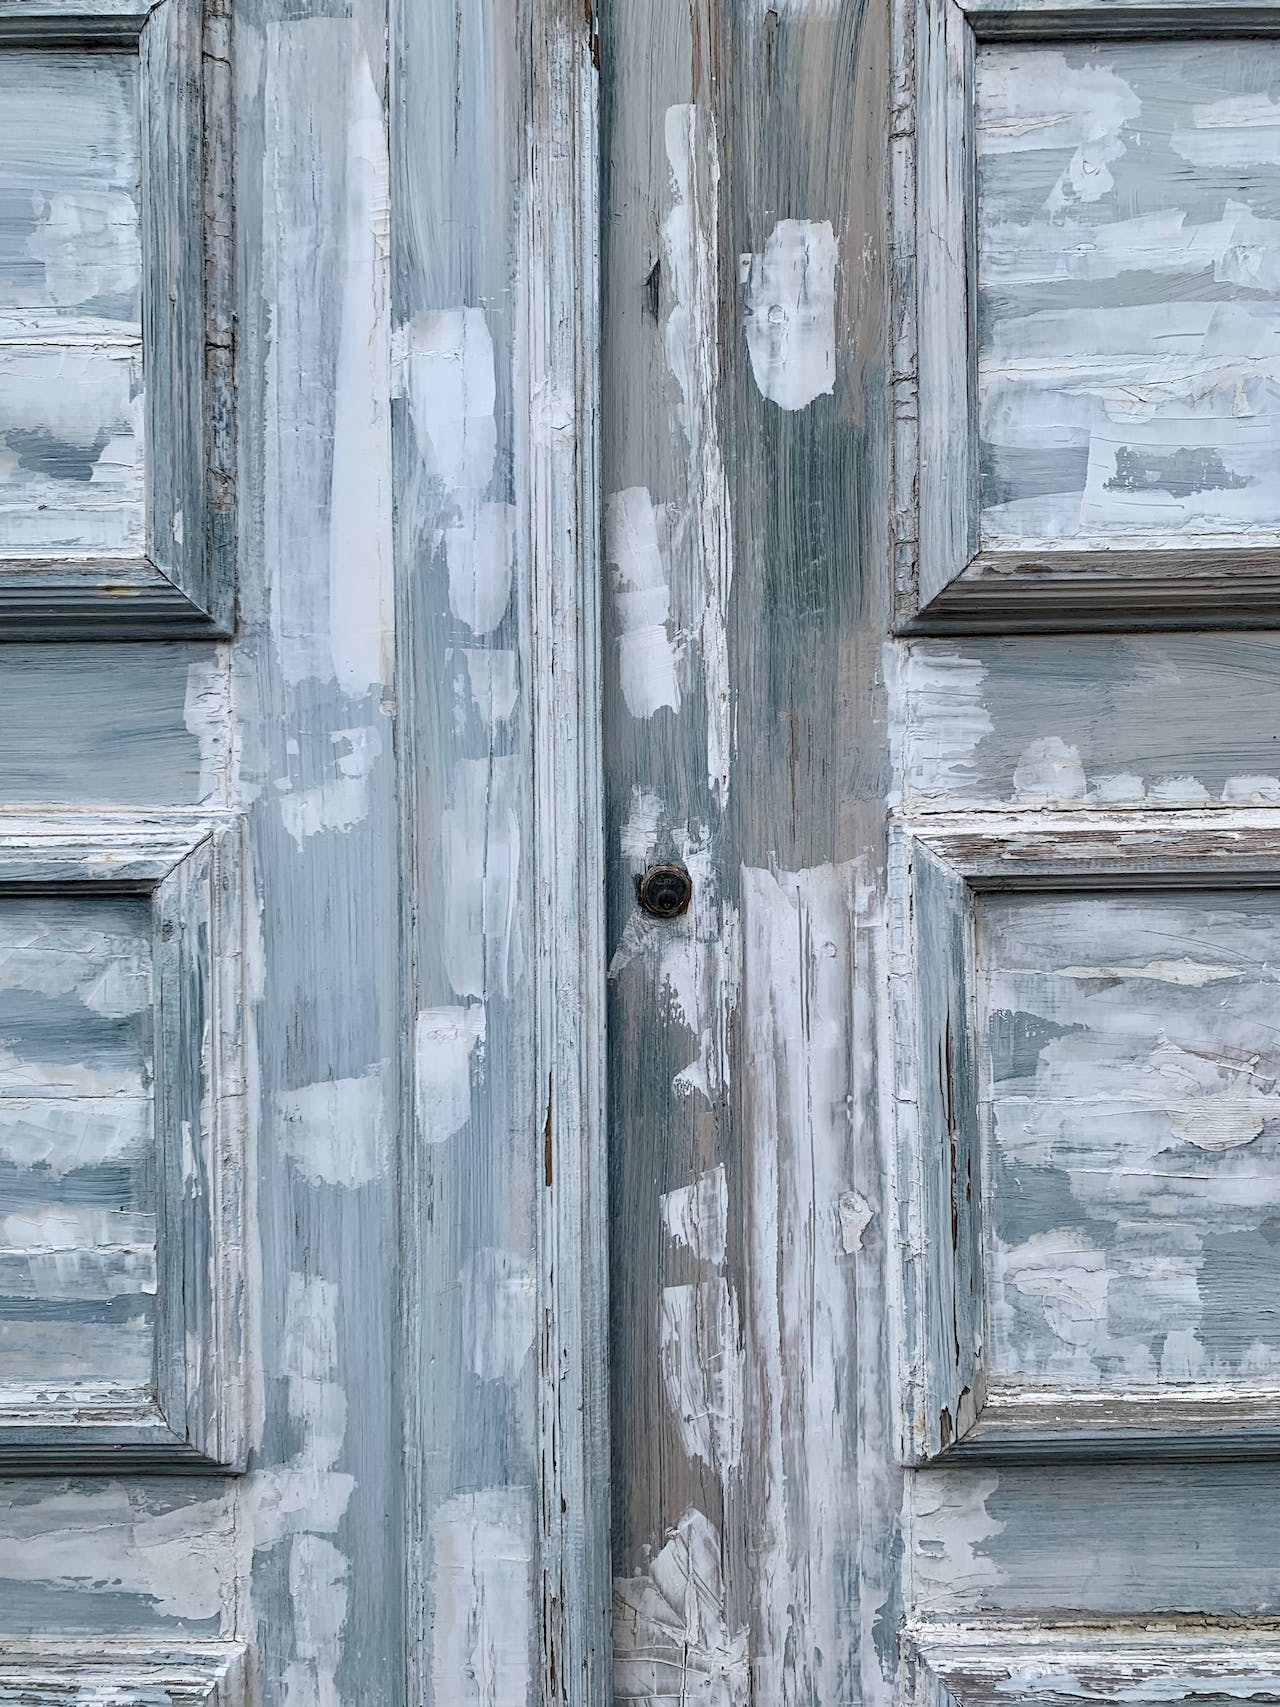 How To Repair A Door Frame With Wood Filler